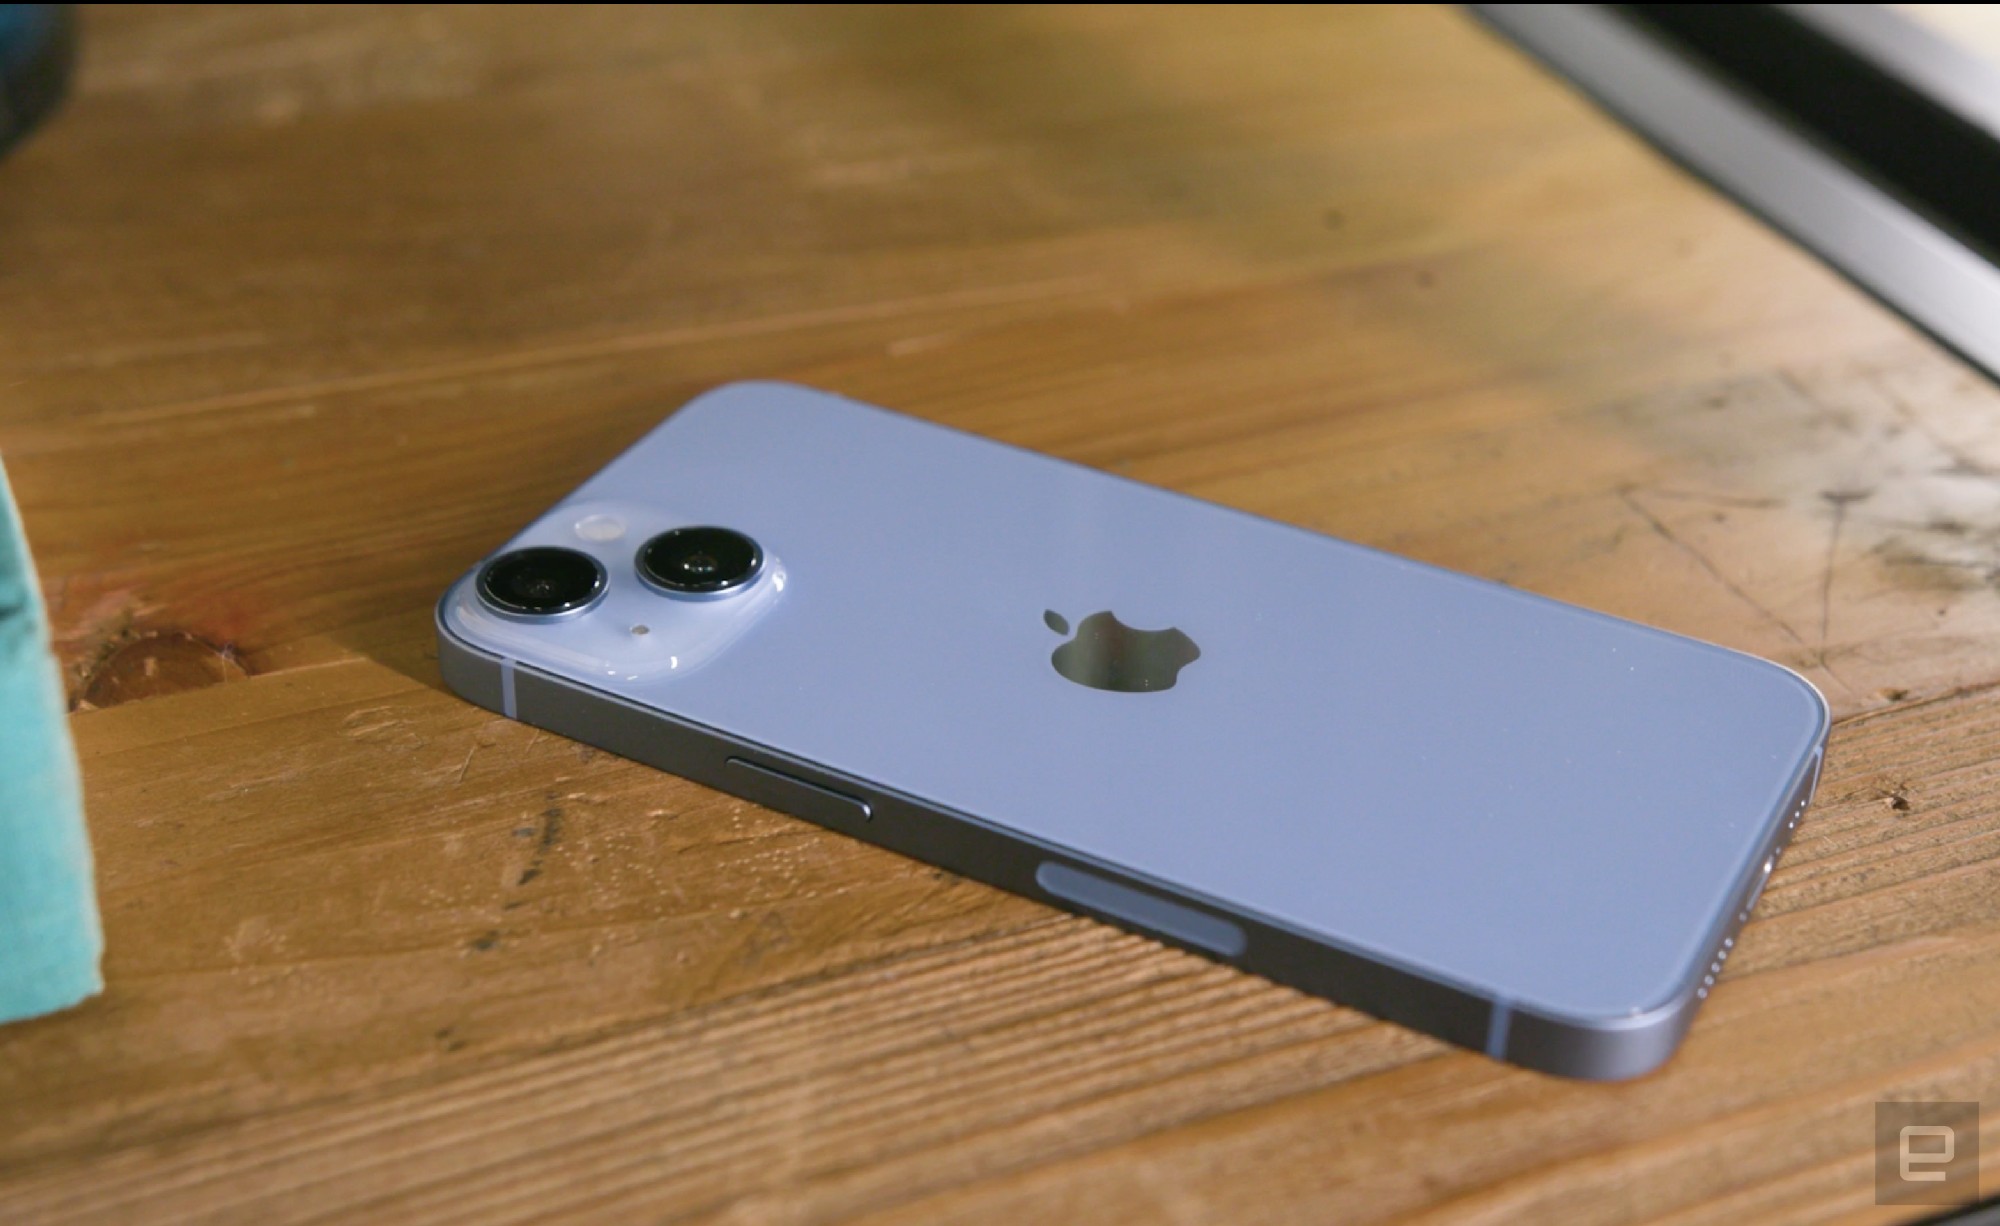 The blue iPhone 14 laying face down on a wooden surface, with its right edge facing the camera.